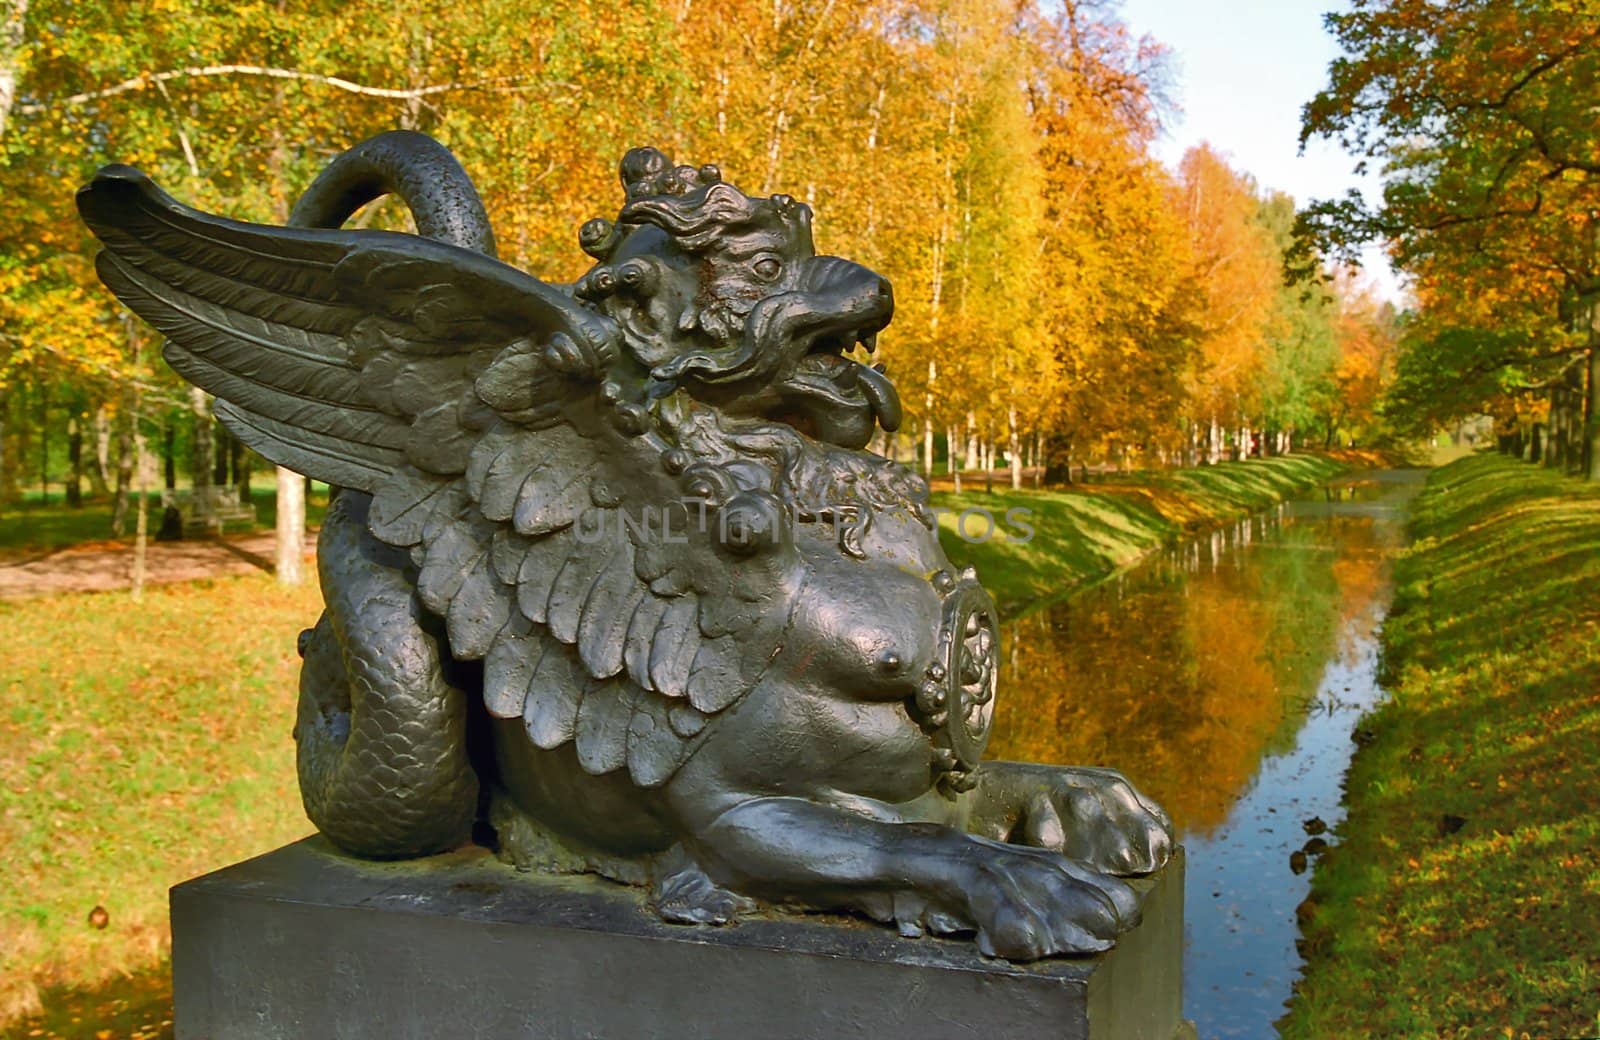 Sculpture of the Dragon on foreground of the autumn landscape